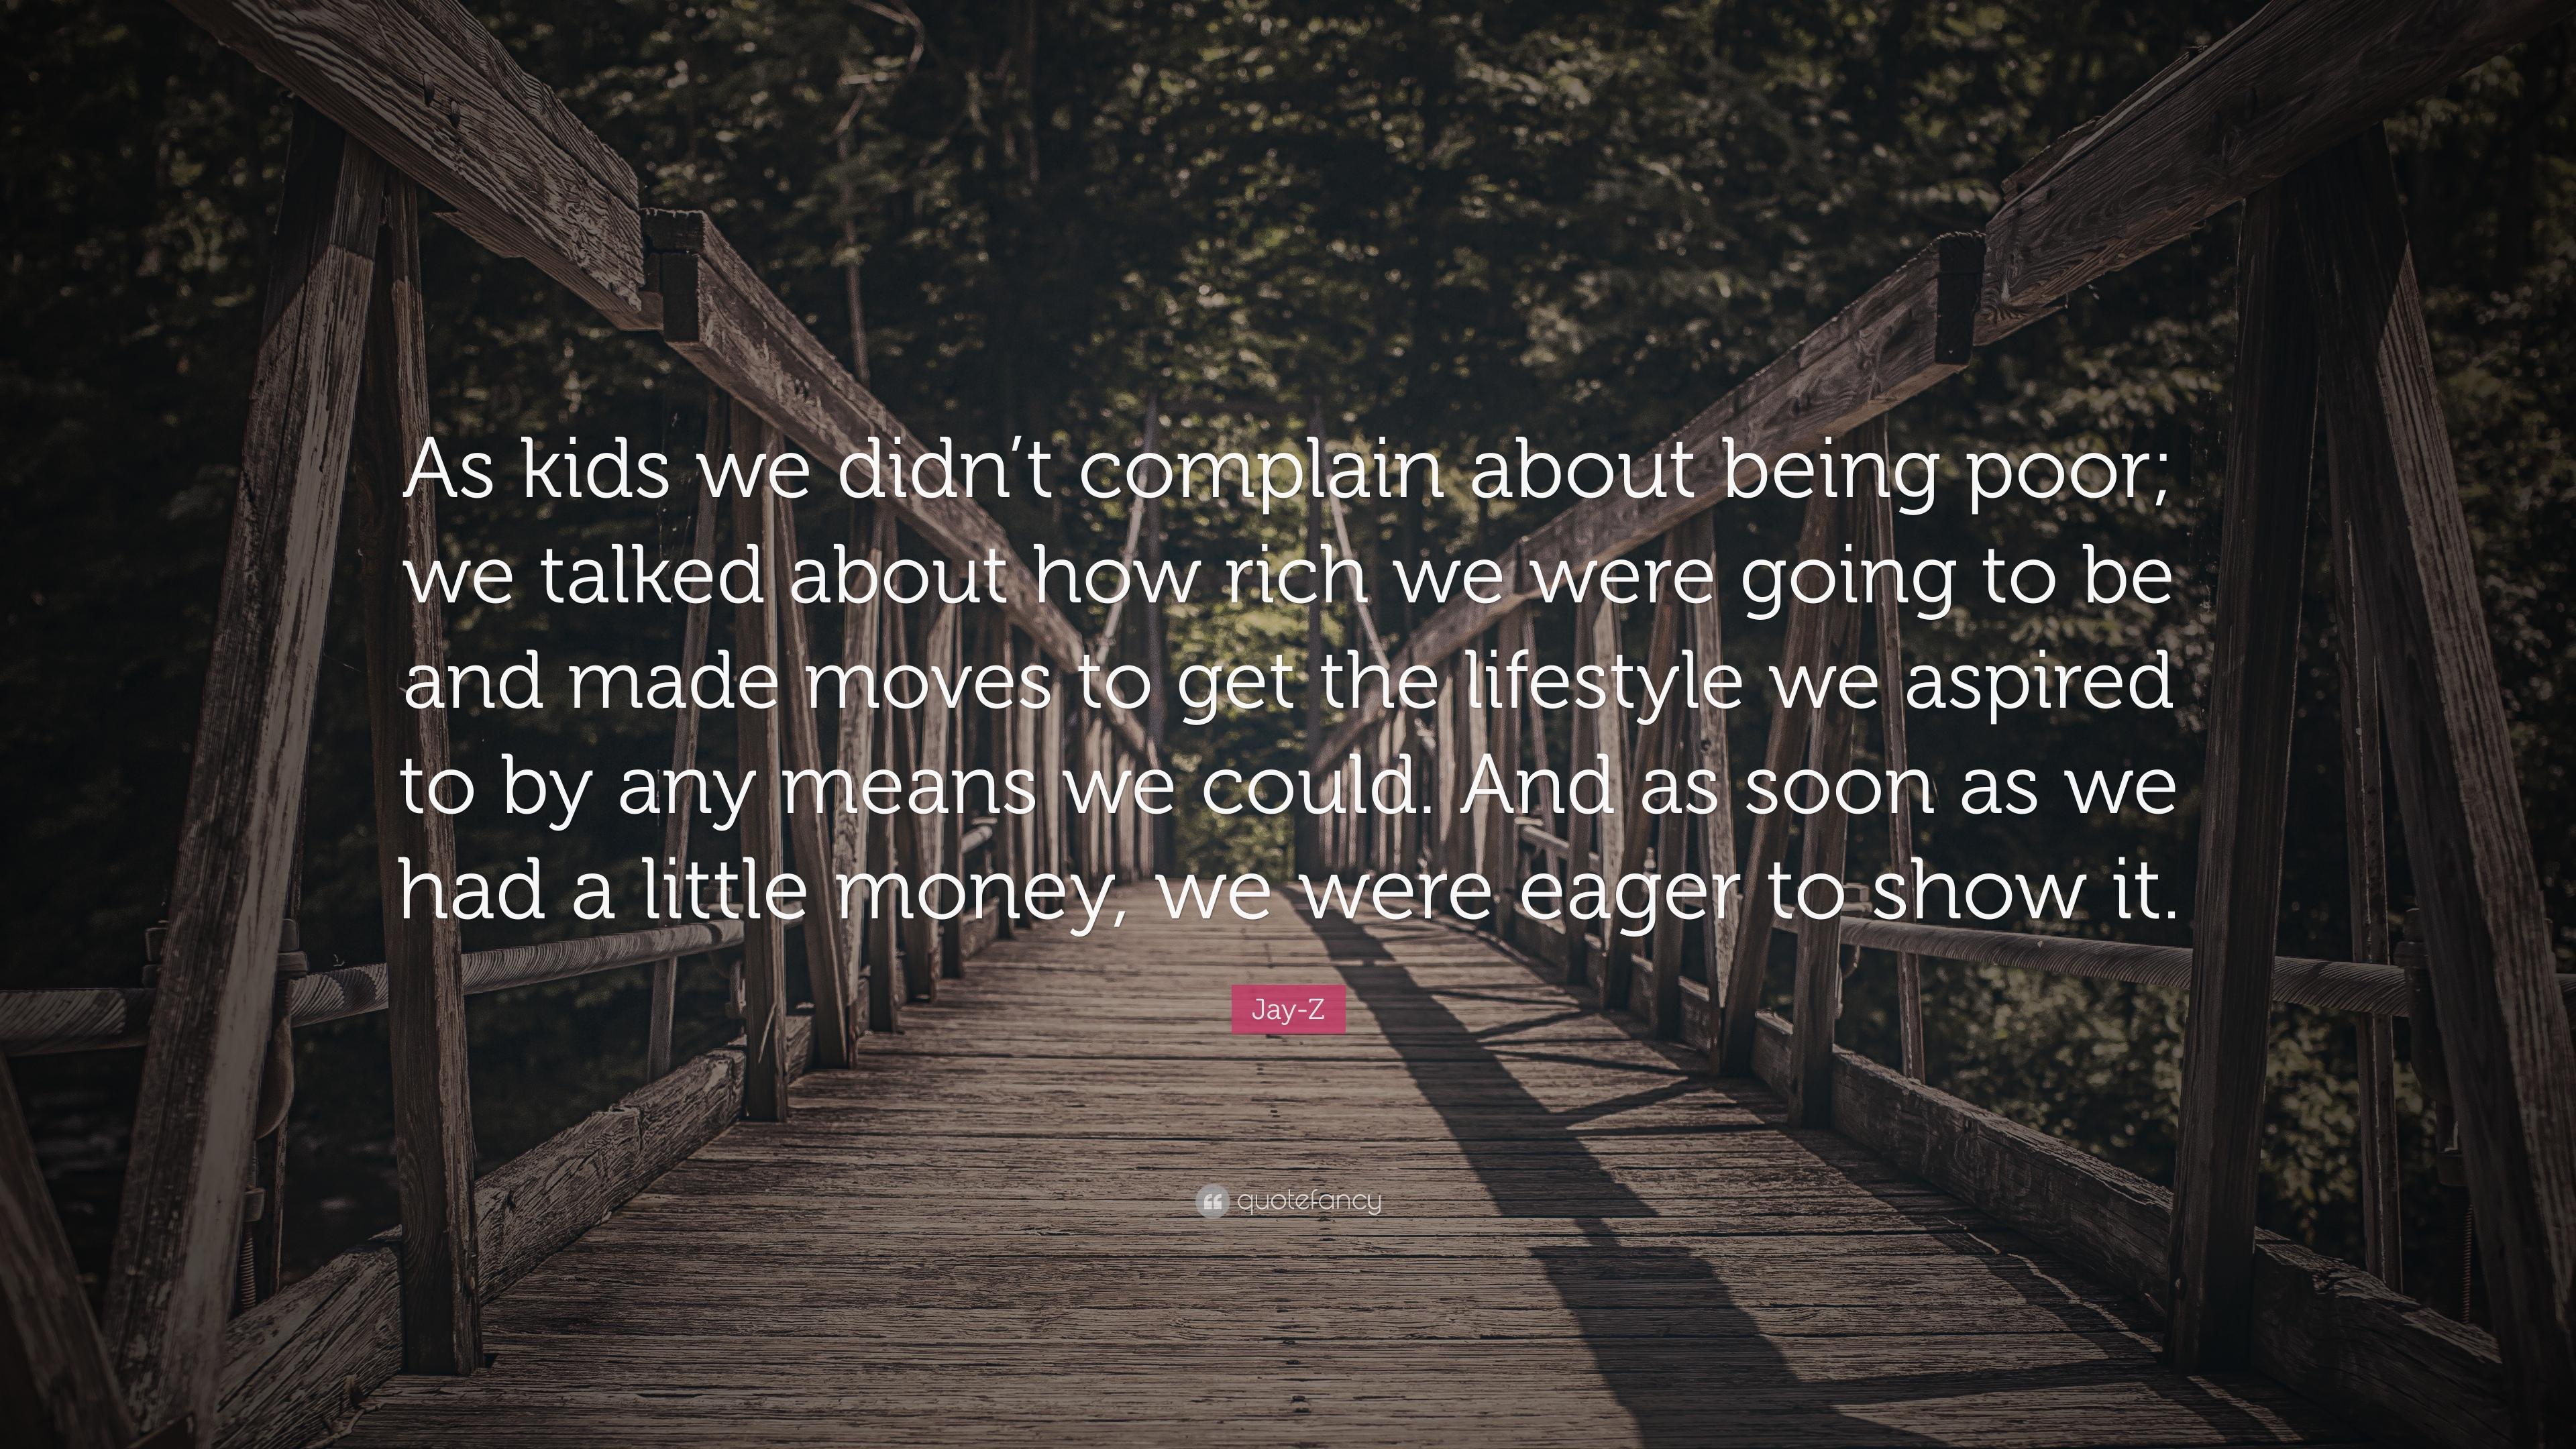 Jay Z Quote: “As Kids We Didn't Complain About Being Poor; We Talked